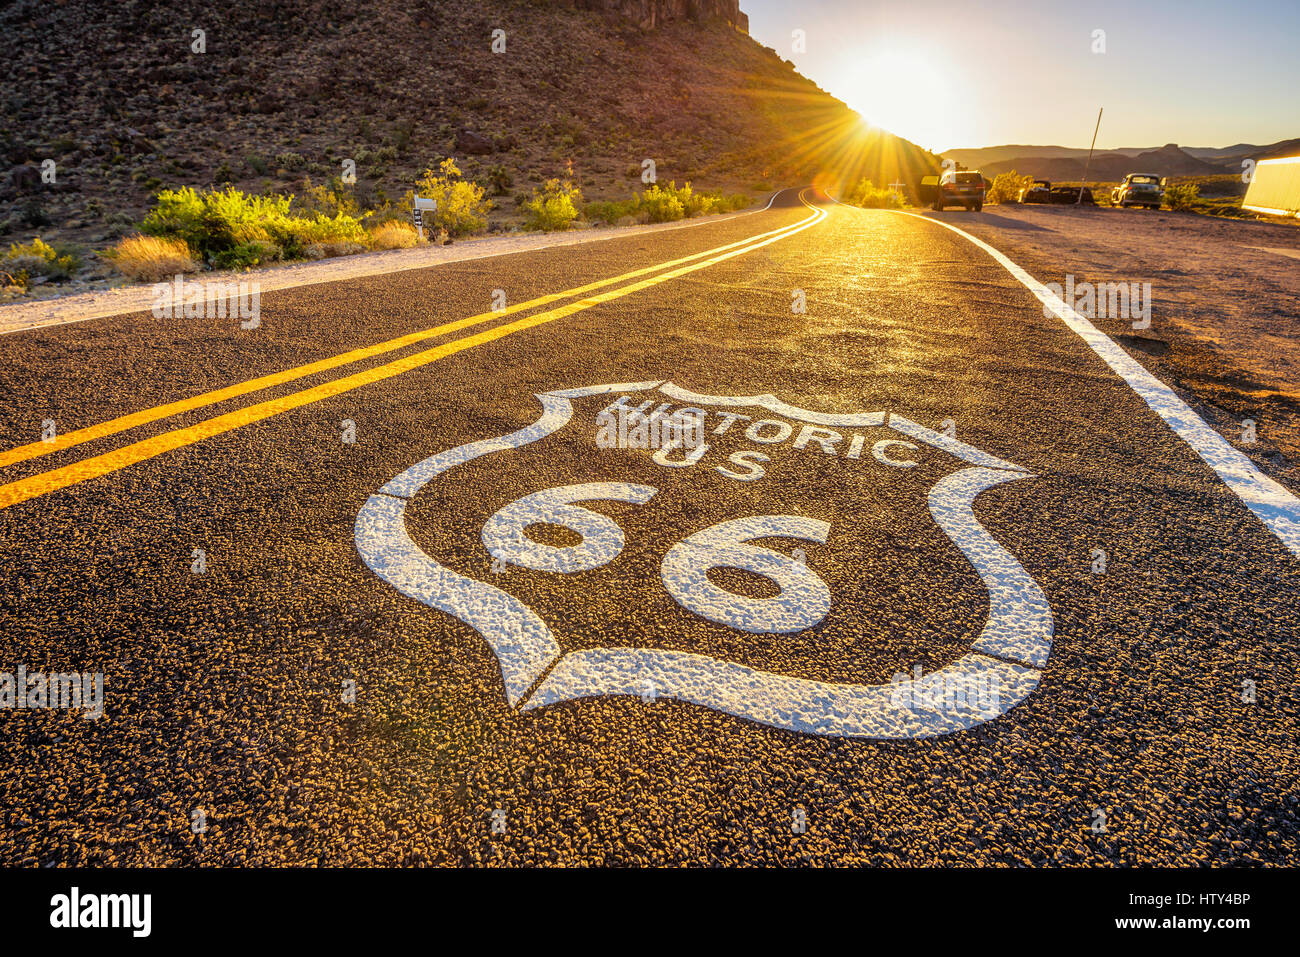 Street sign on historic route 66 in the Mojave desert photographed against the sun at sunset Stock Photo